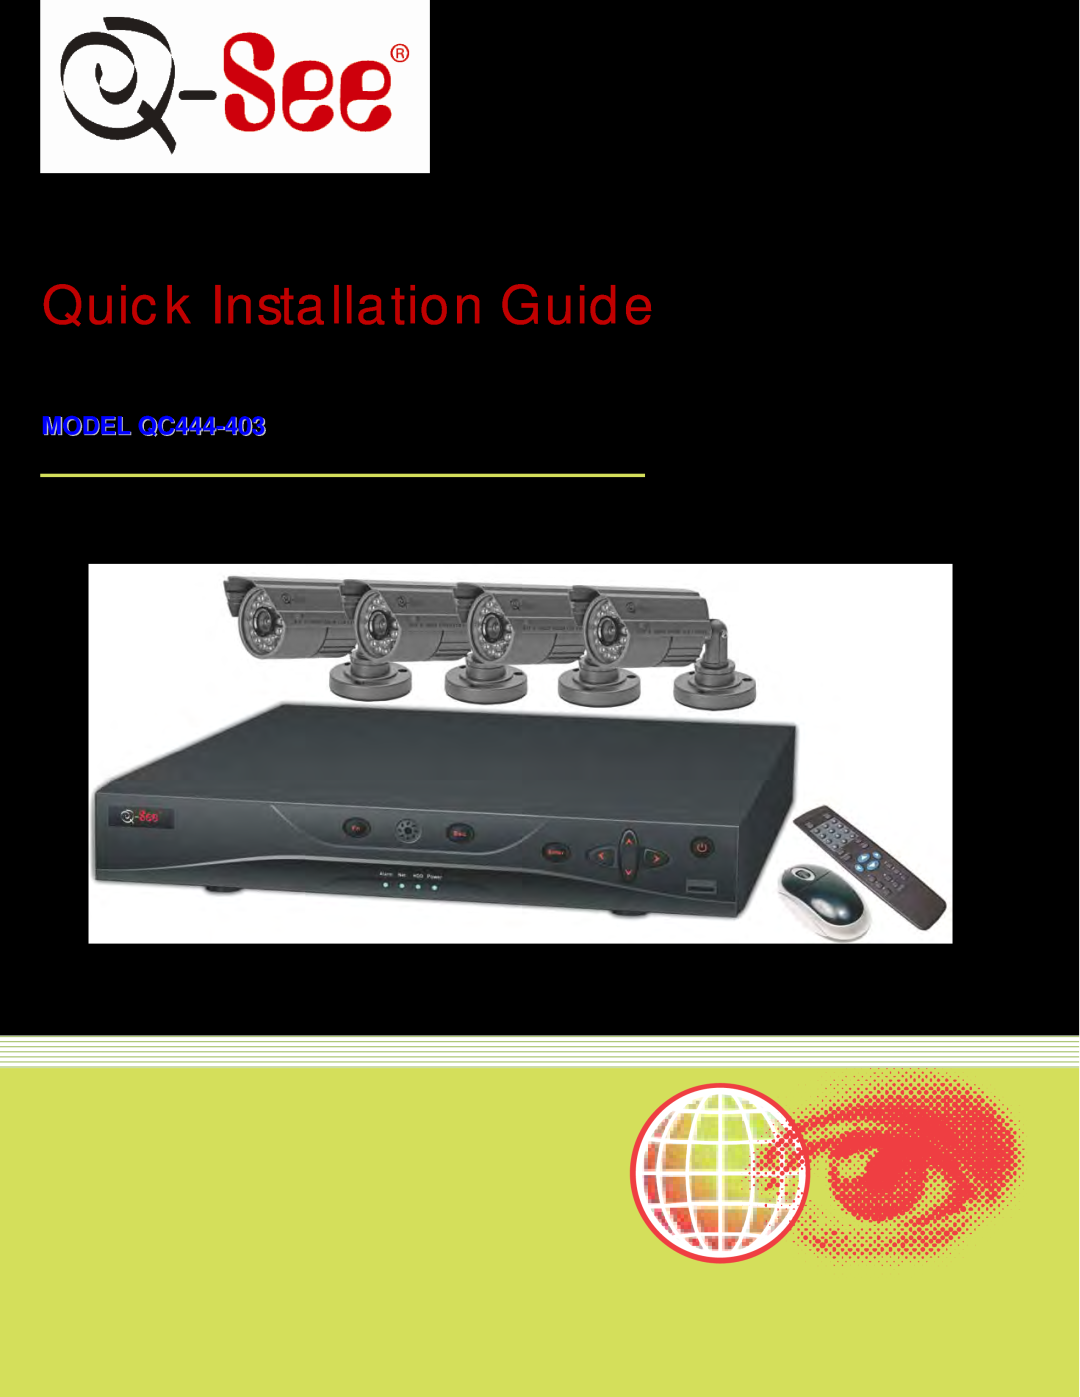 Q-See QC444-403 manual Quick Installation Guide, Channel H.264 Compression DVR and 4 Color CCD Camera Kits 